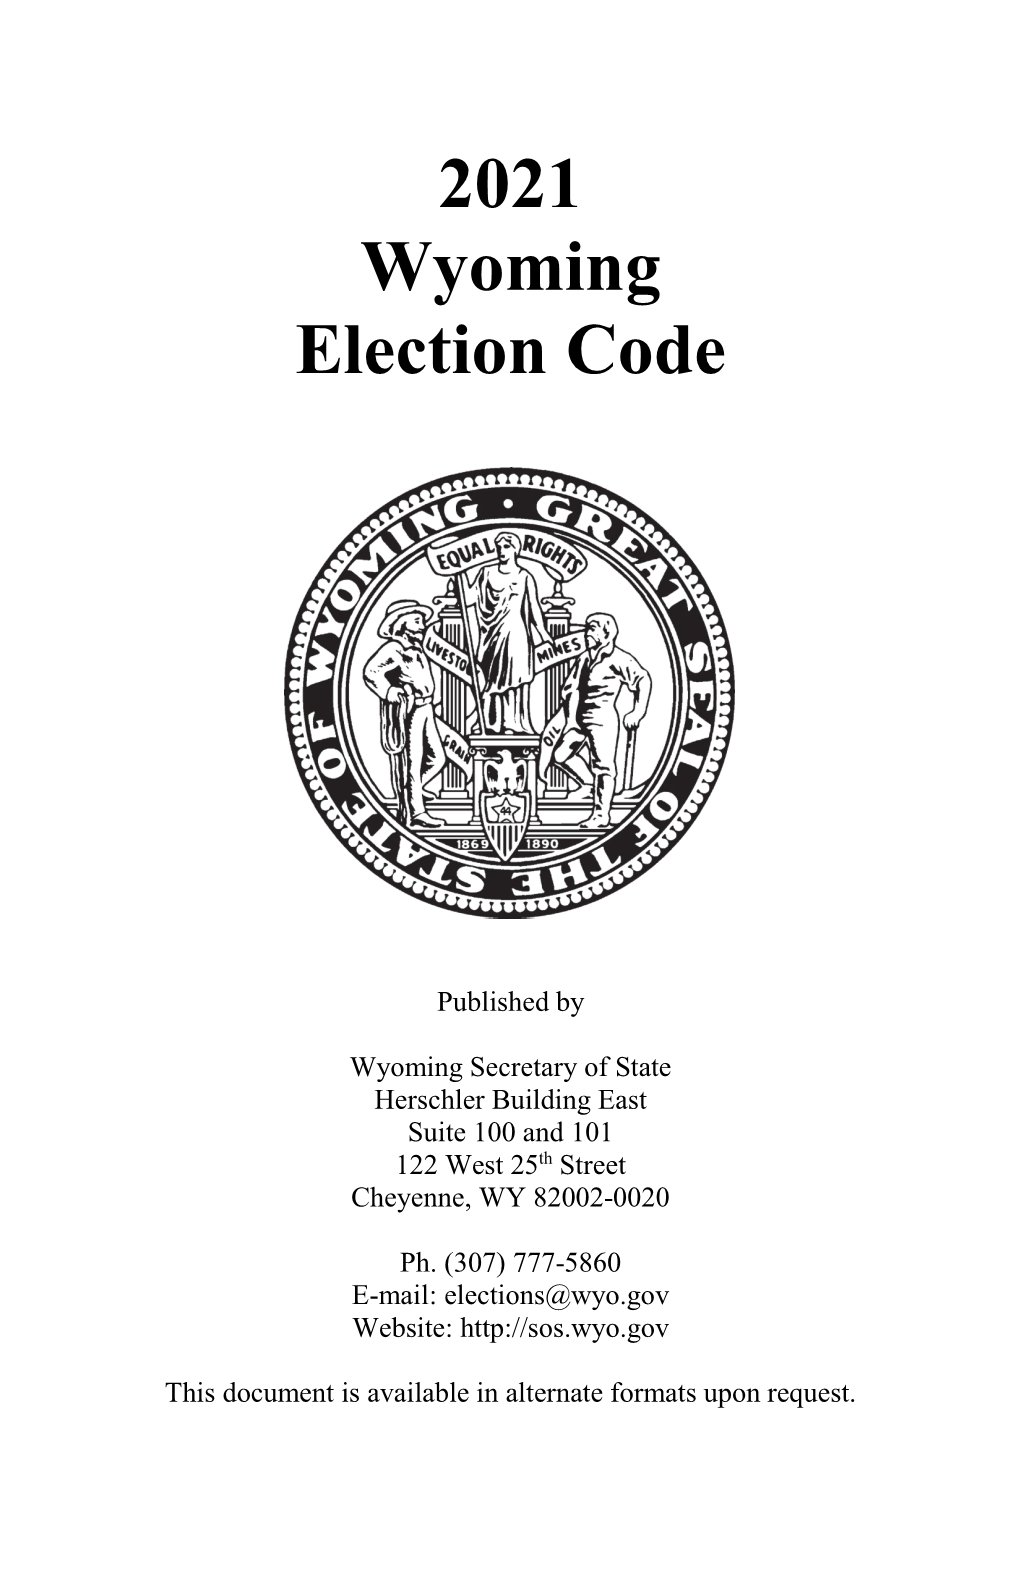 2021 Wyoming Election Code